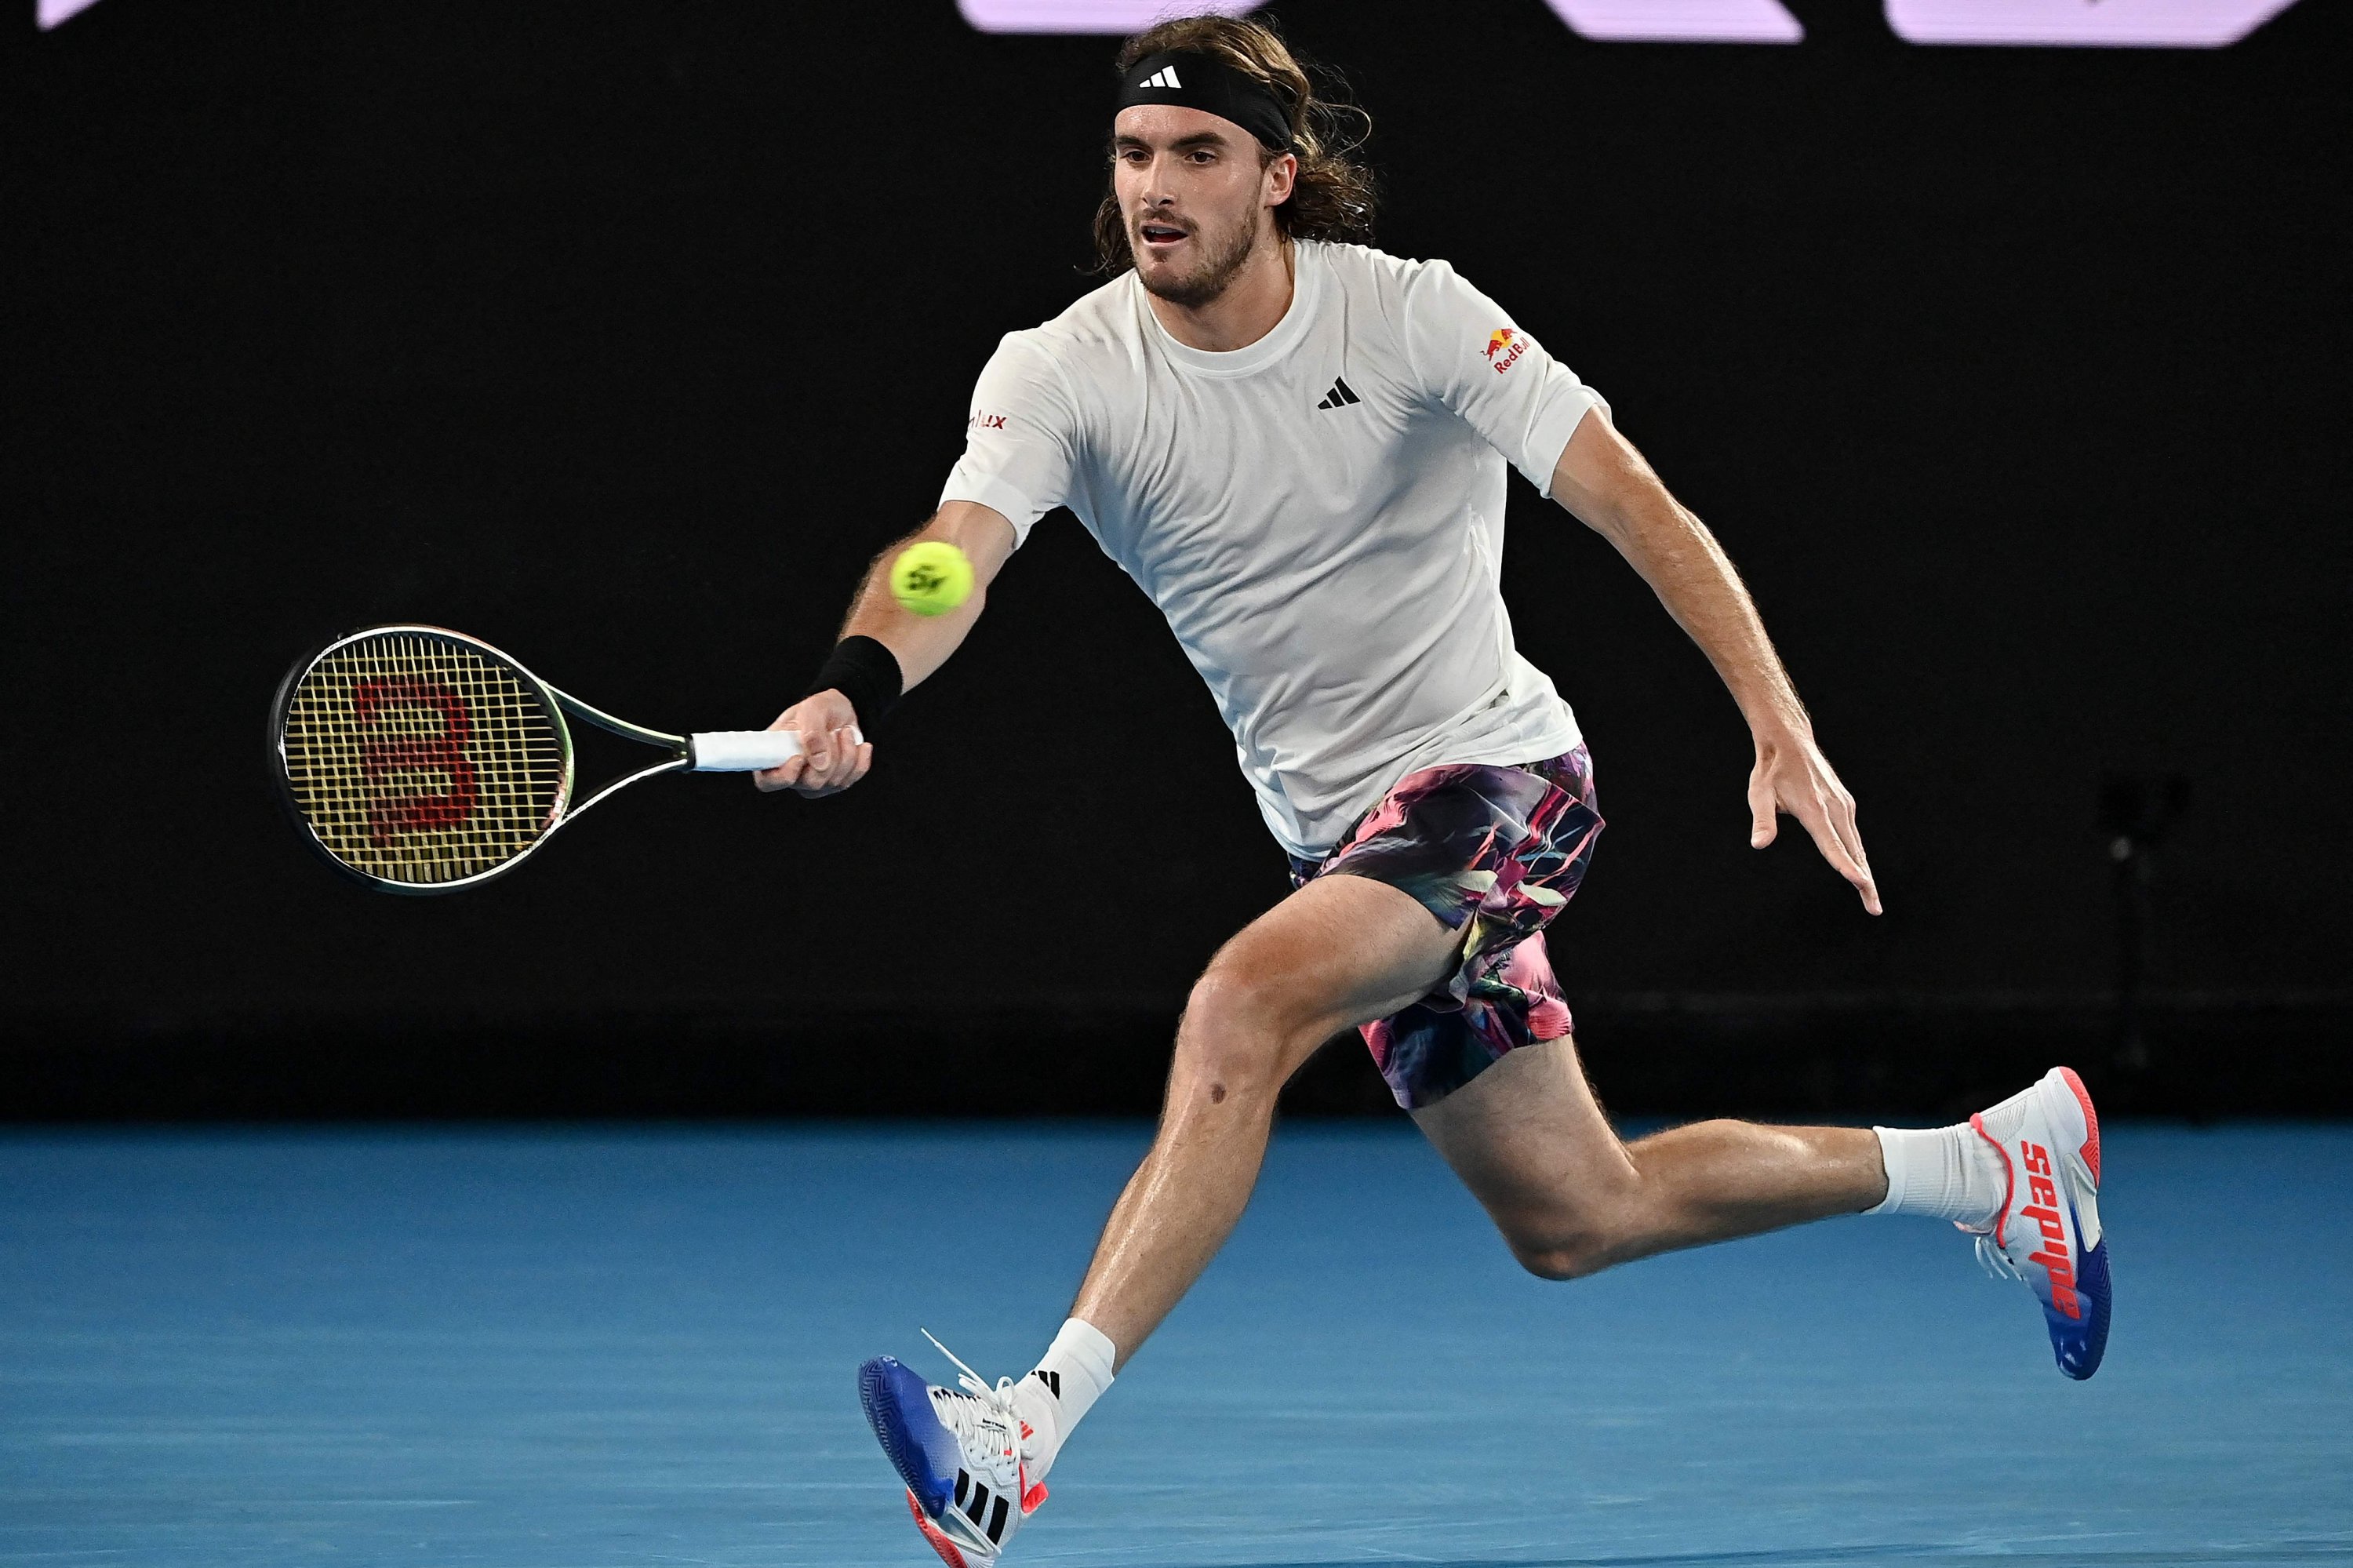 Tsitsipas in Australian Open 3rd round after ruthless performance Daily Sabah